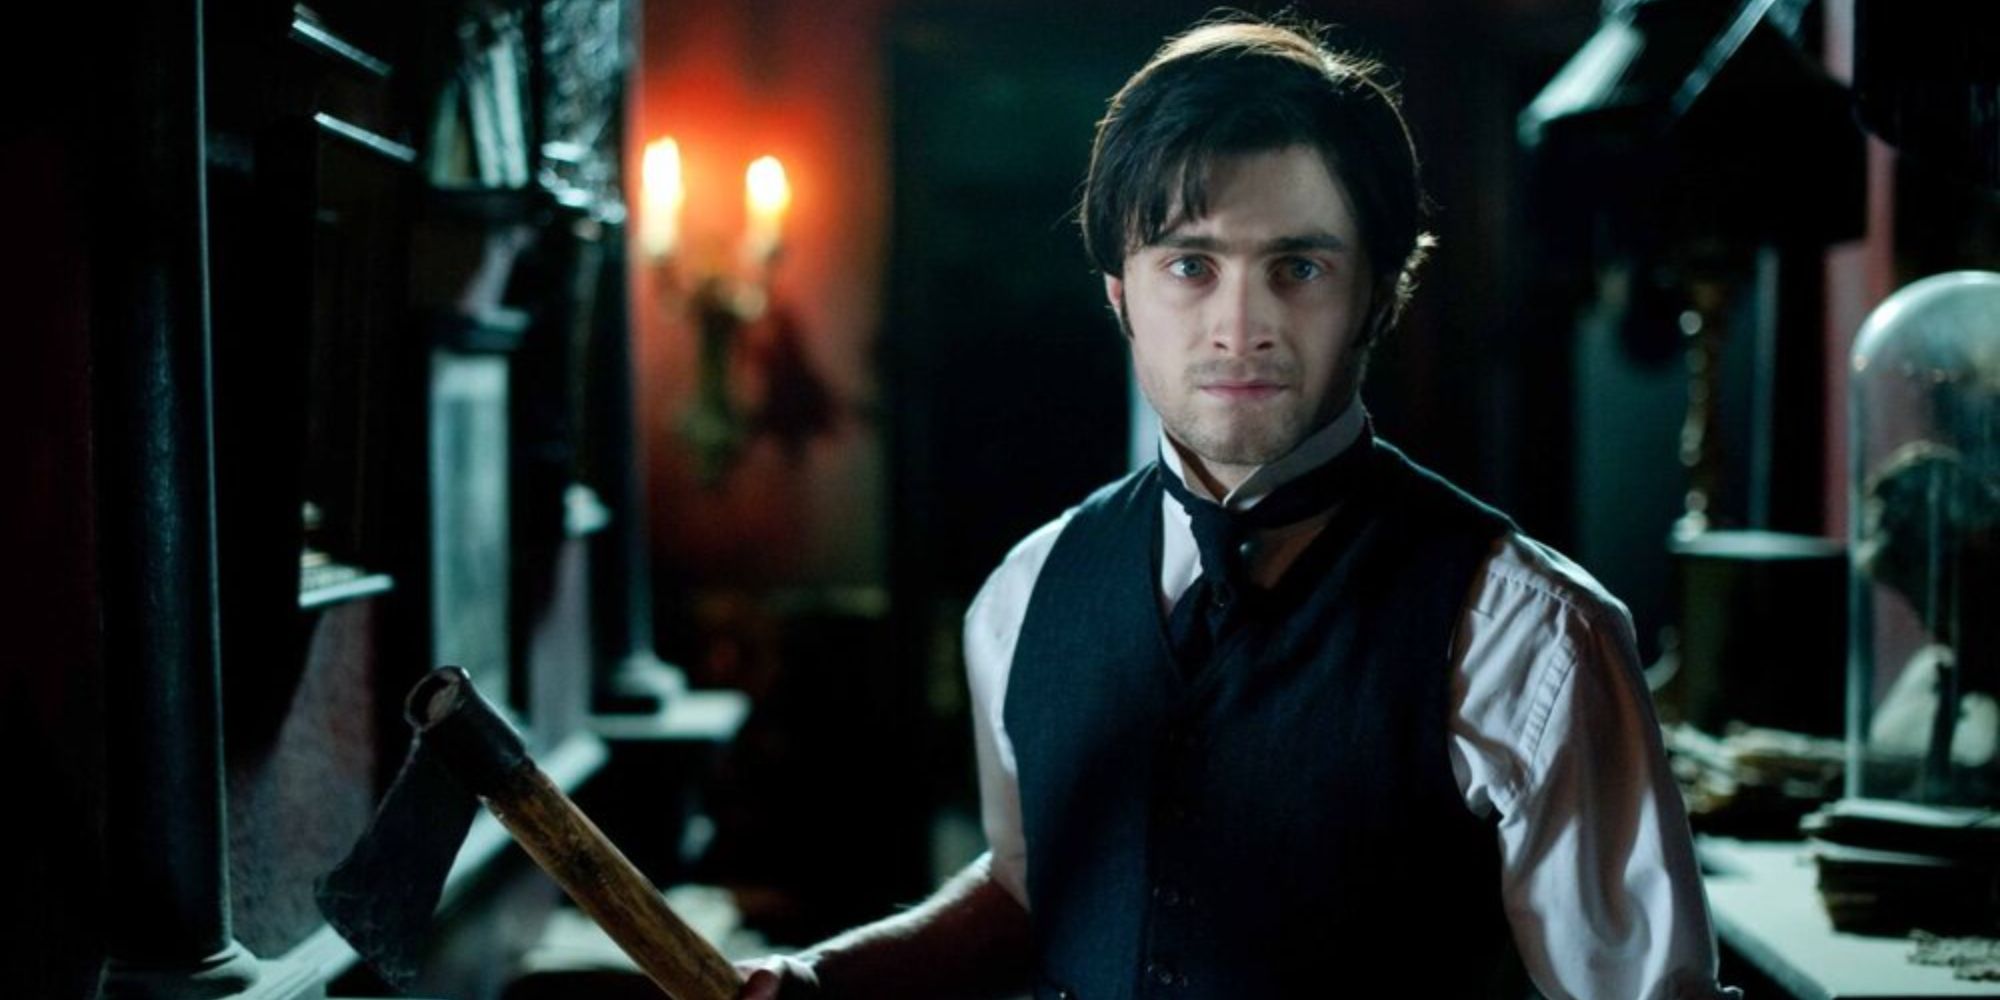 the-woman-in-black-movie-review daniel radcliffe with an ax